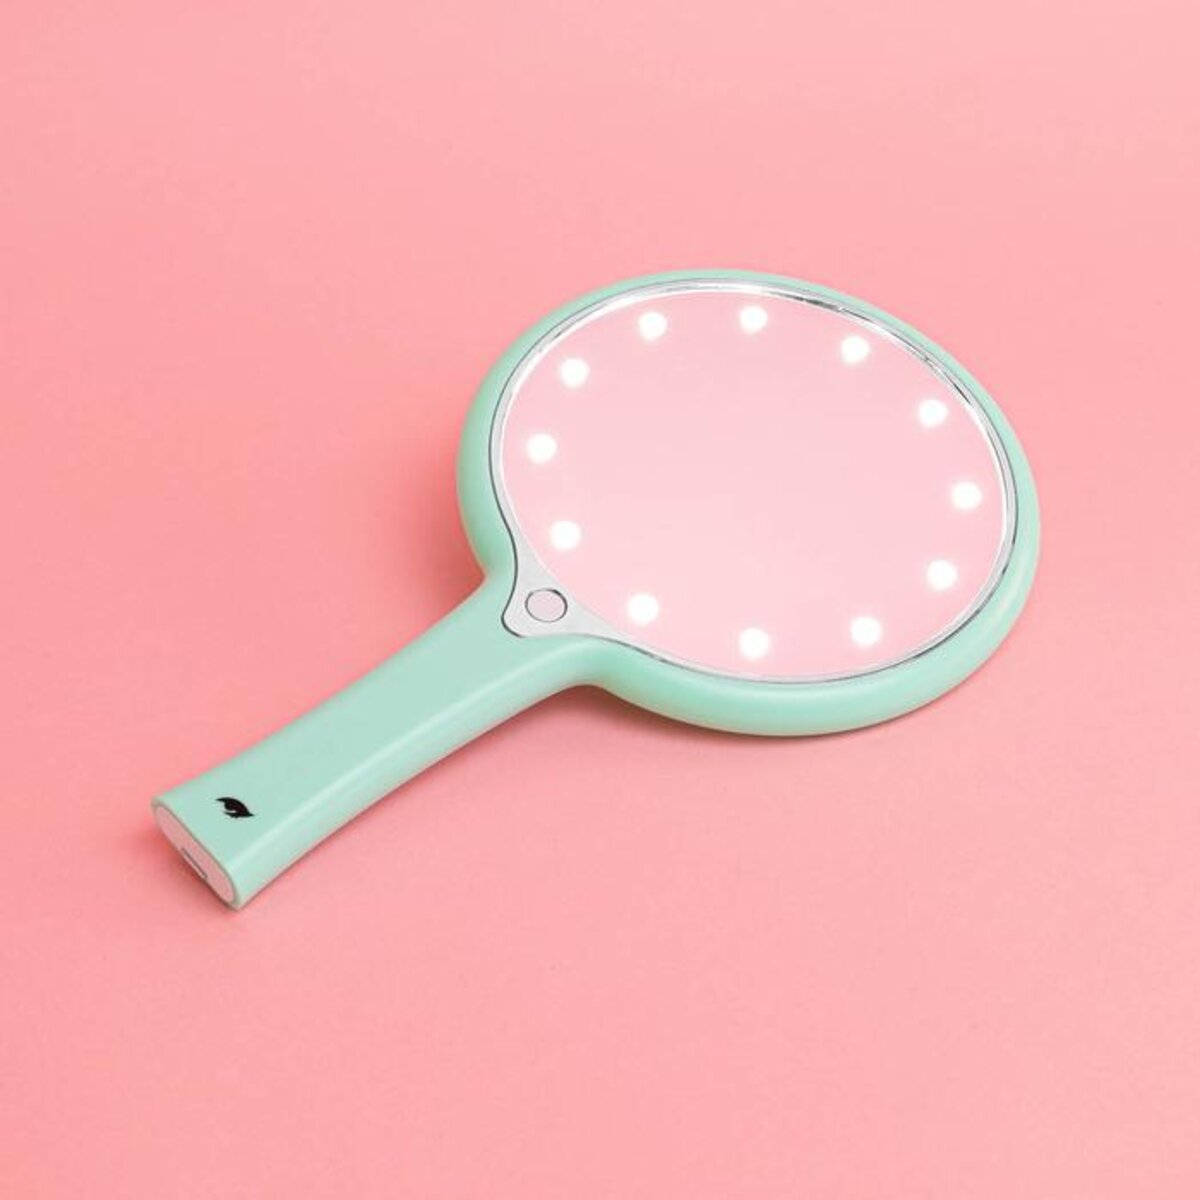 MINT CHIC HAND HELD MIRROR WITH LED LIGHTS - KIMCHI